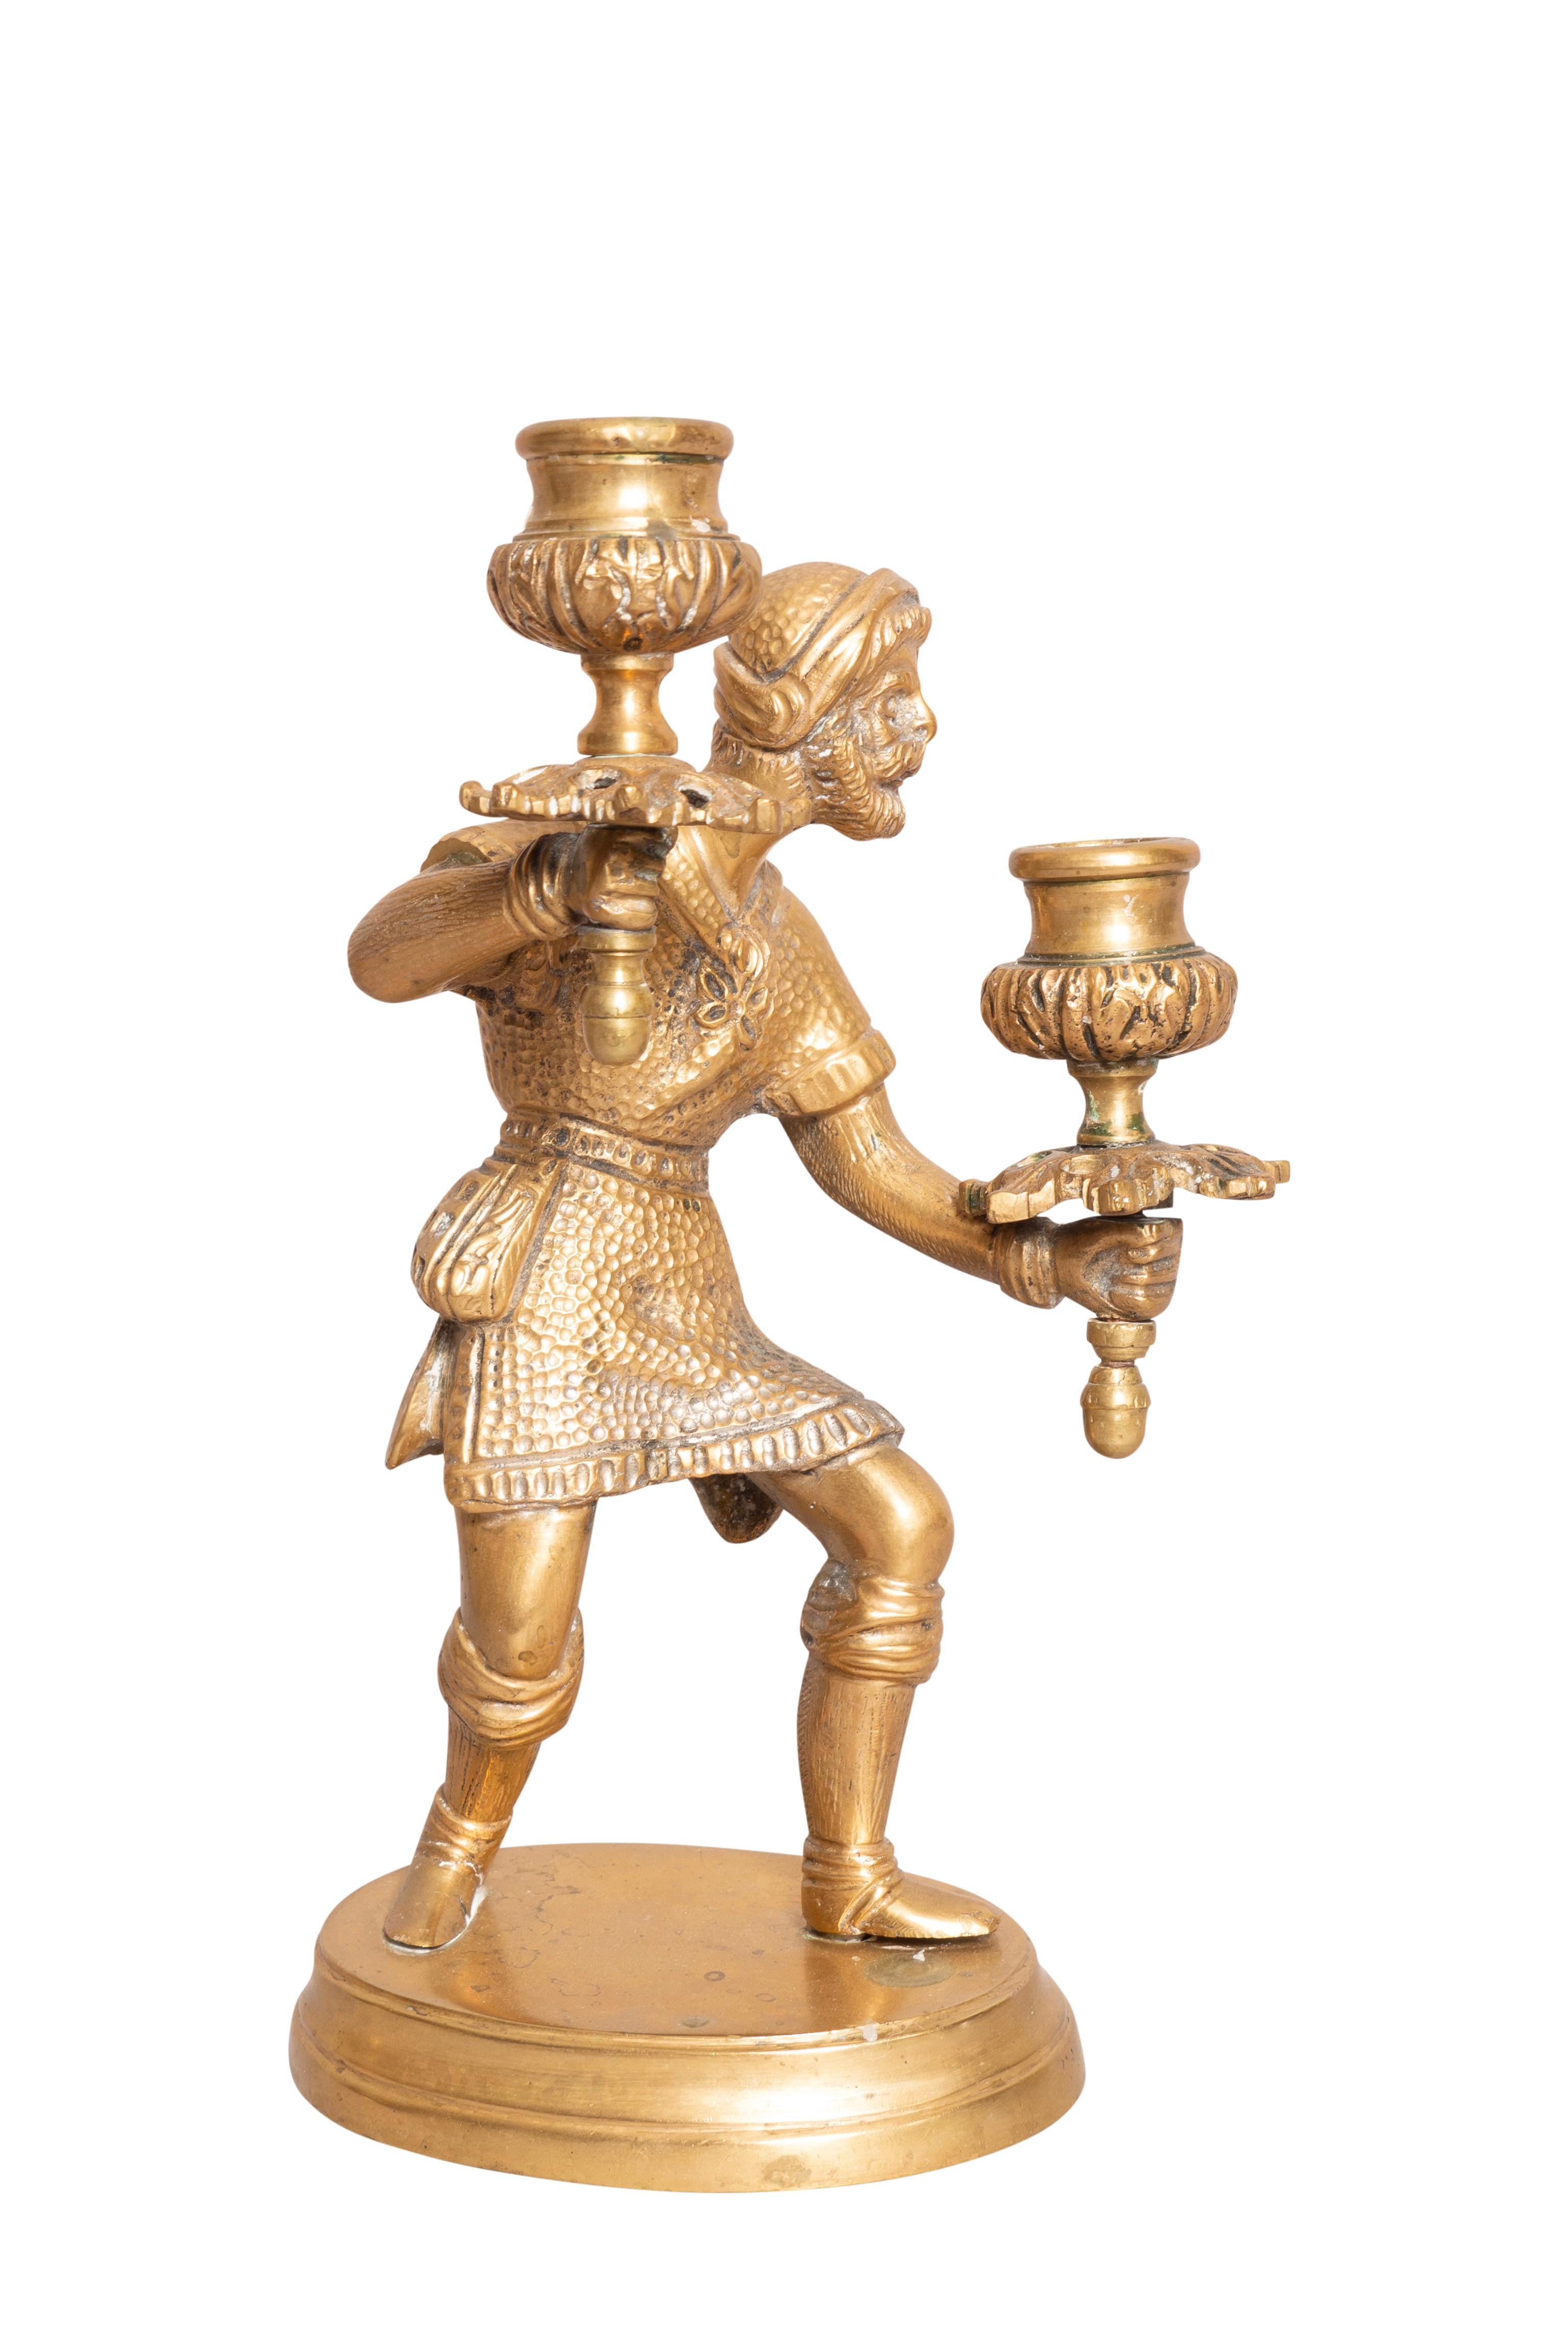 Each male figure in medieval dress holding two candle holders. Oval bases. From the estate of founder of Yankee Candle Company.